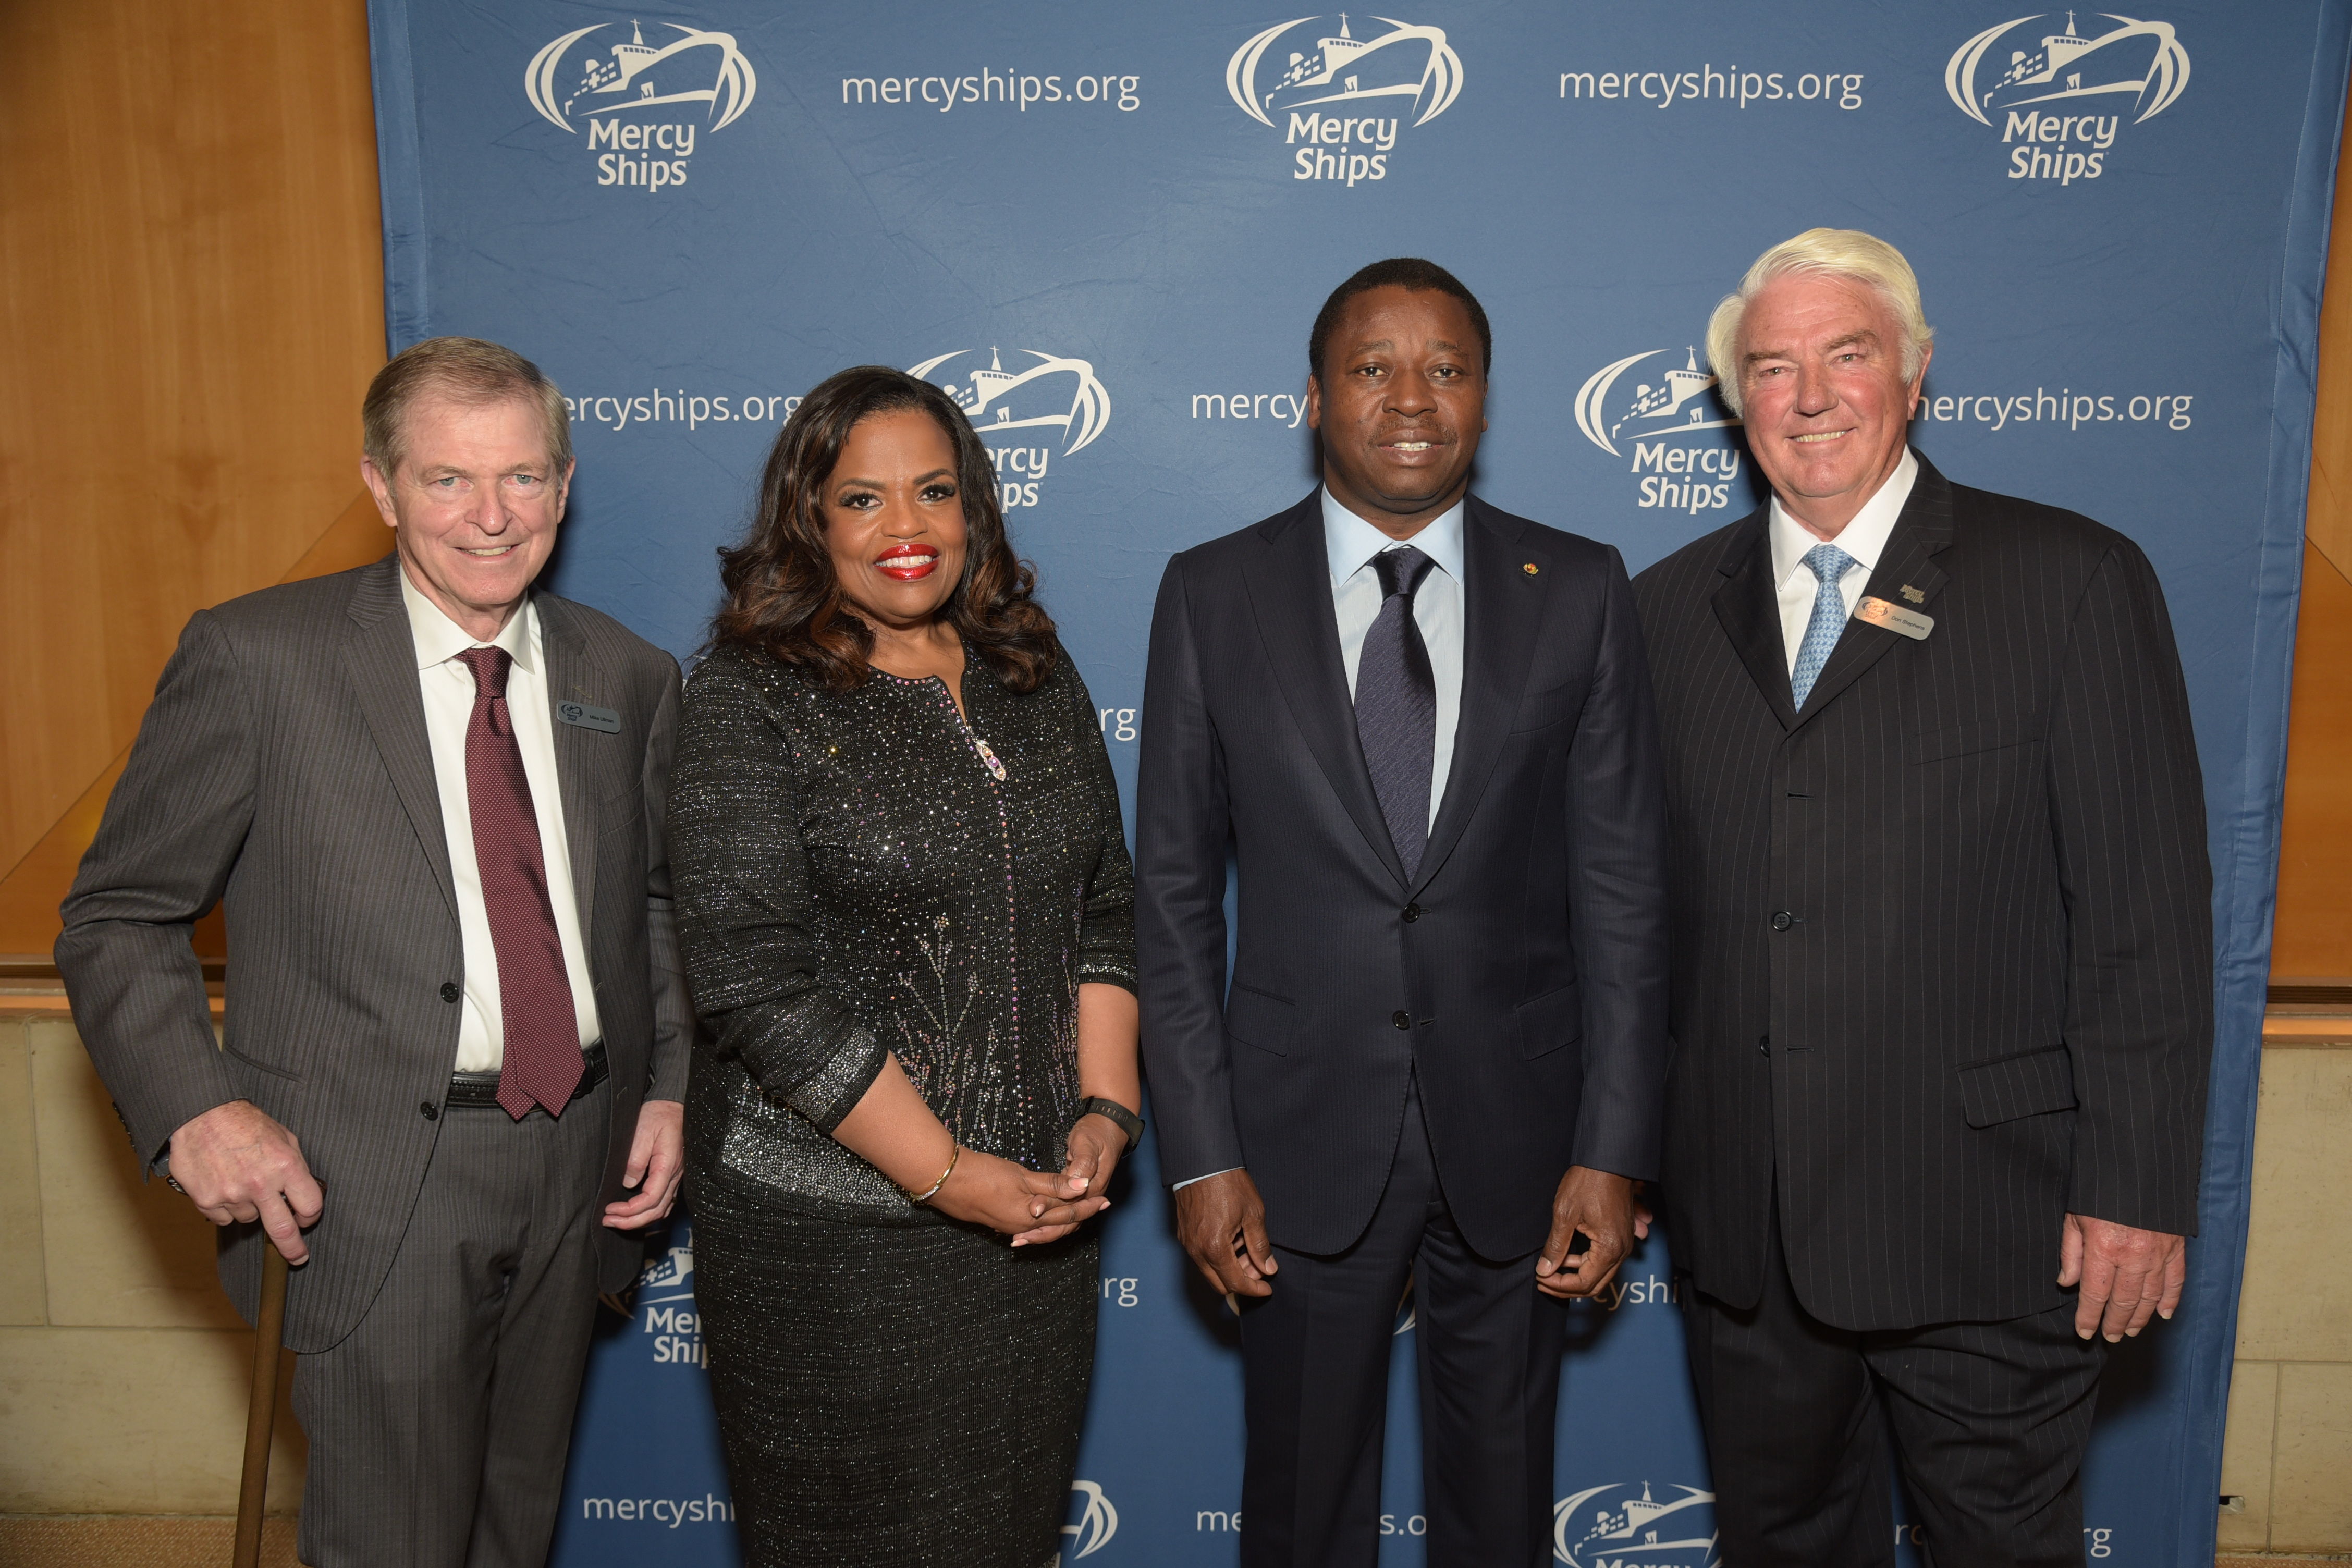 Mike Ullman, chairman of Mercy Ships International; Mercy Ships President Rosa Whitaker; H.E. Faure Gnassingbe, the president of The Togolese Republic; and Don Stephens, Founder of Mercy Ships.